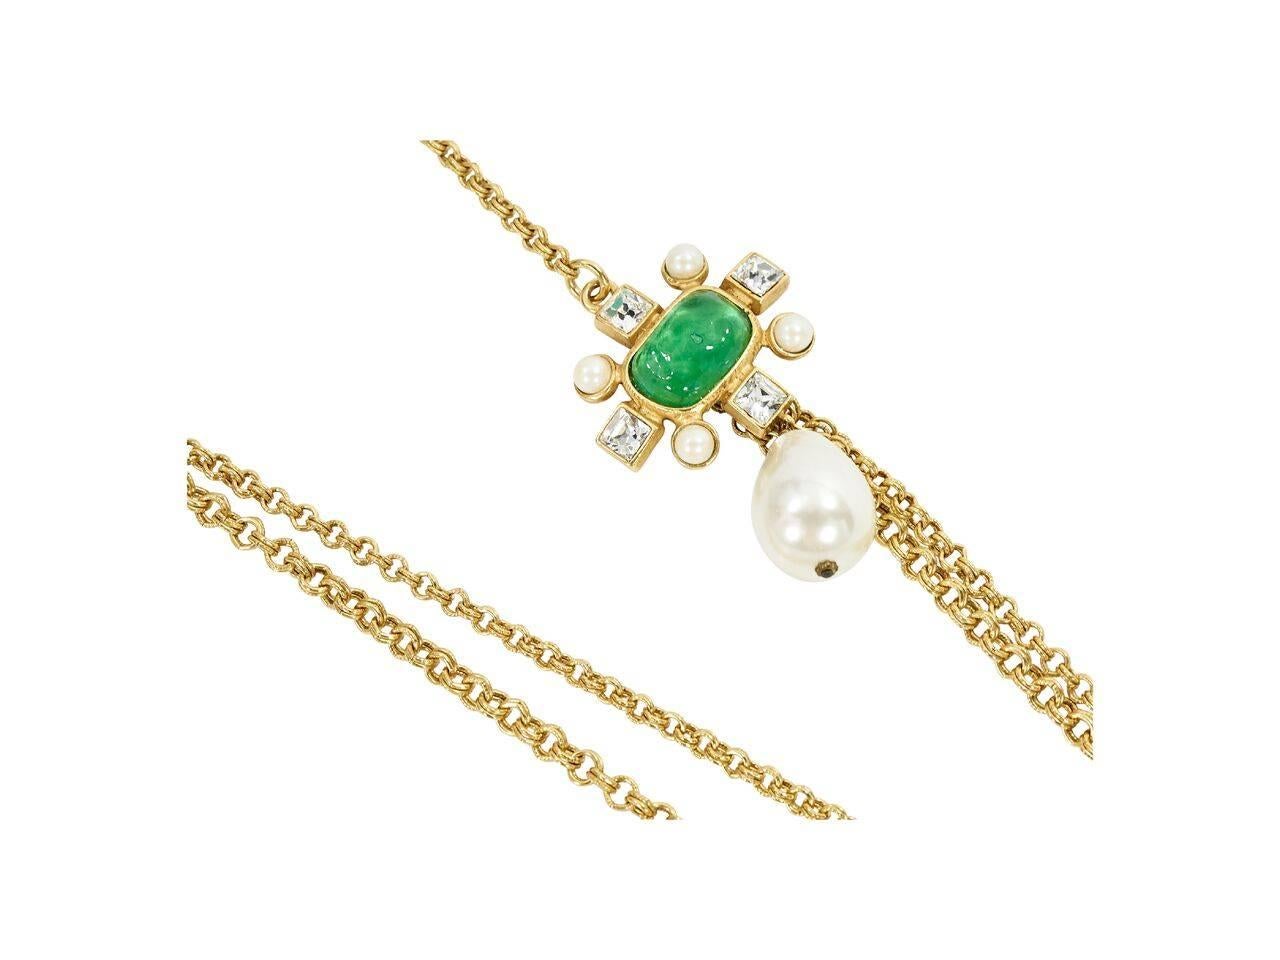 Product details:  Vintage double strand chain necklace by Gerard Yosca.  Accented with a green stone and faux pearl pendant.  Lobster clasp closure.  16.5